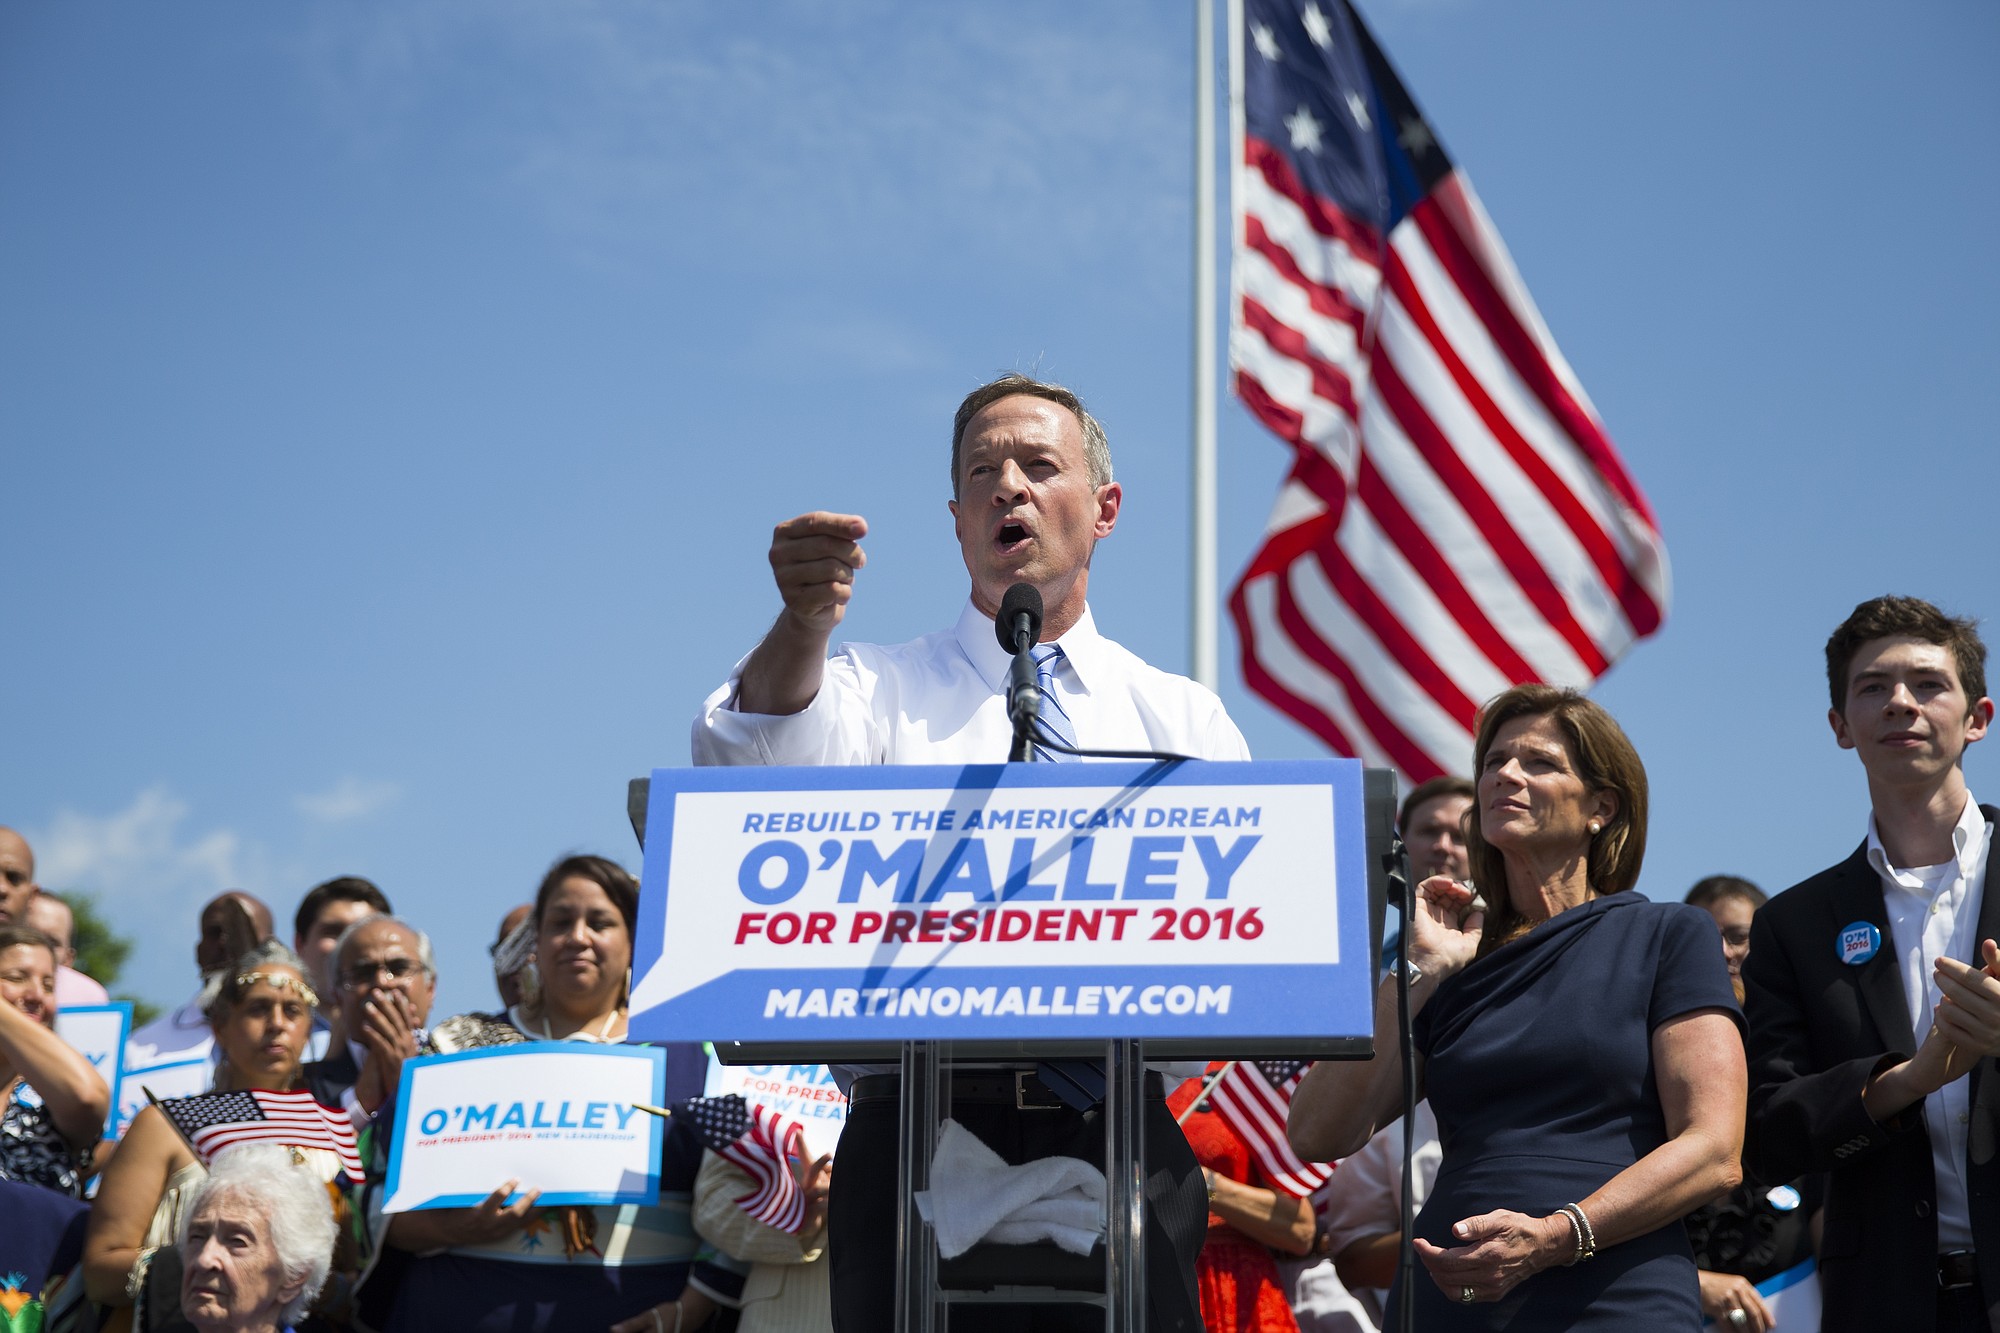 Former Maryland Gov. Martin O'Malley speaks during an event to announce that he is entering the Democratic presidential race, on Saturday  in Baltimore.